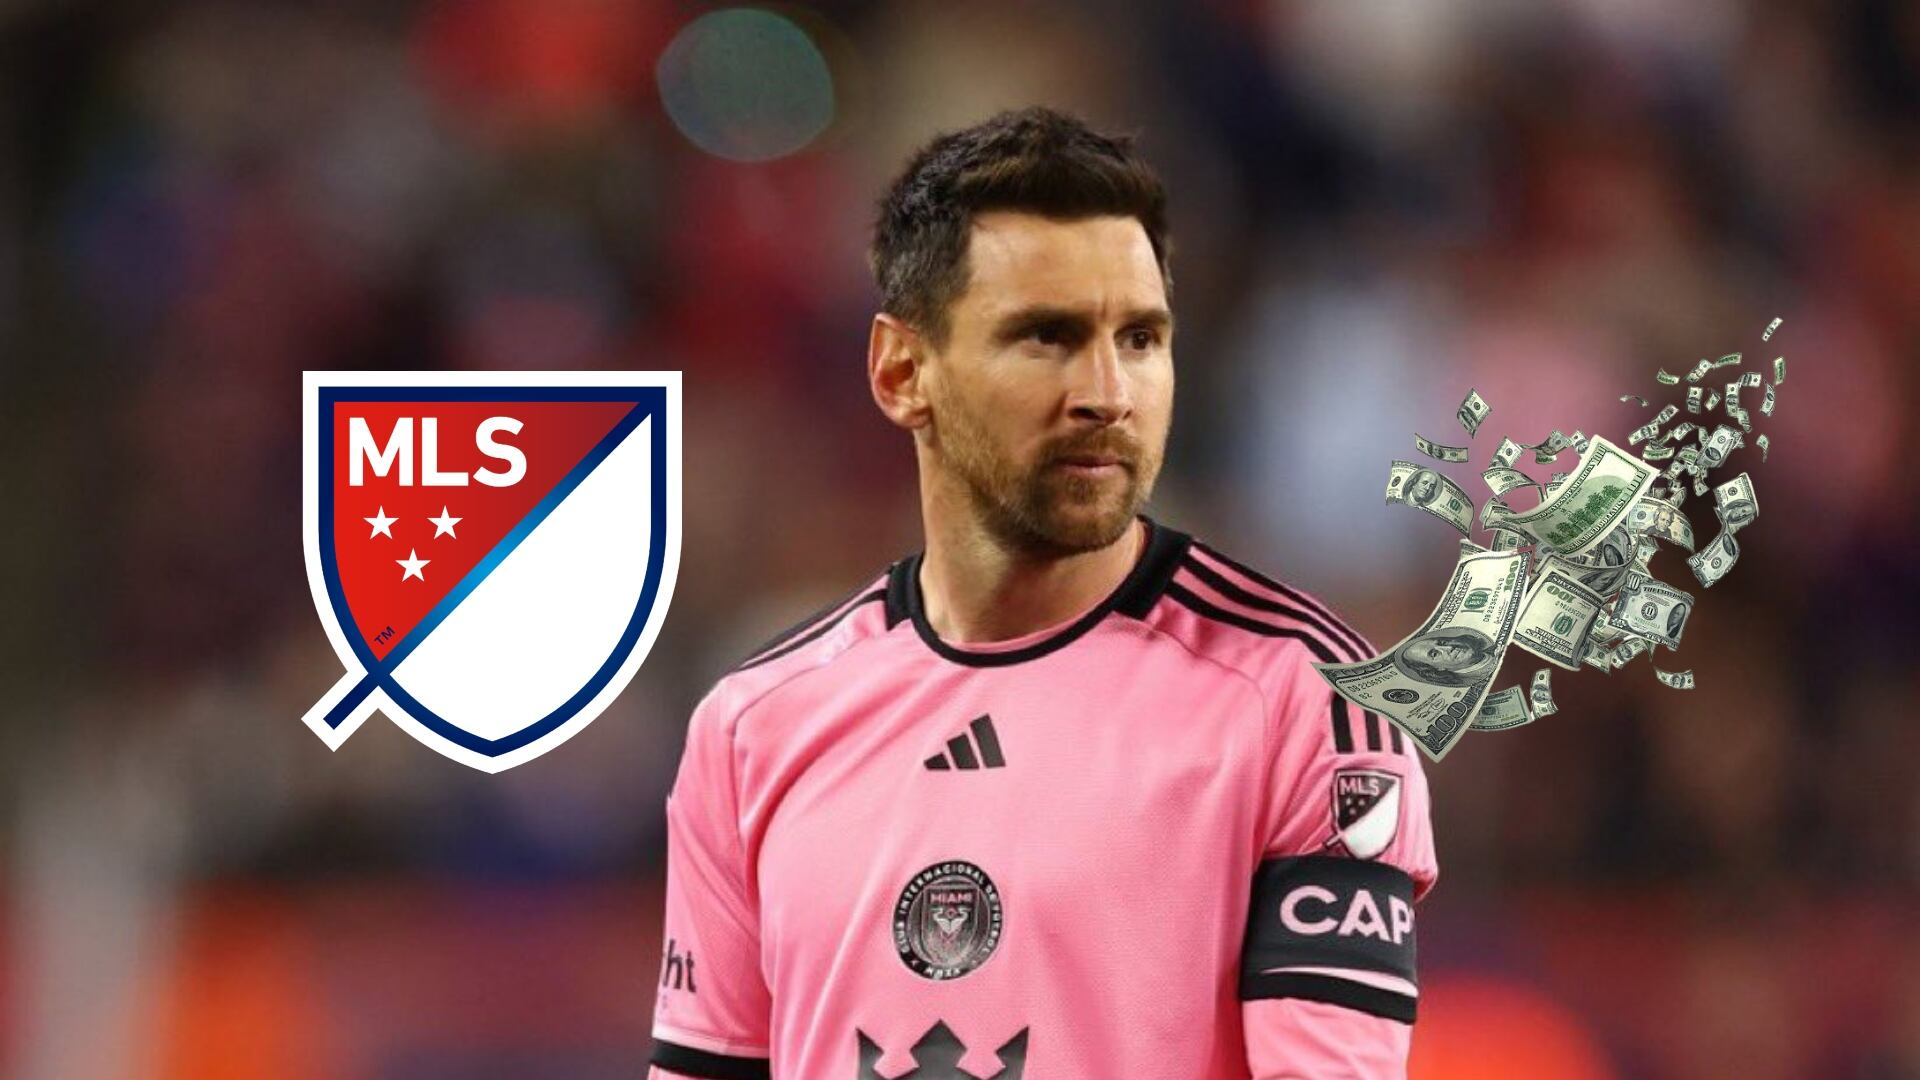 He rejected $200M from Saudi and now he earns this, Messi’s official salary at MLS is revealed and is lower than expected